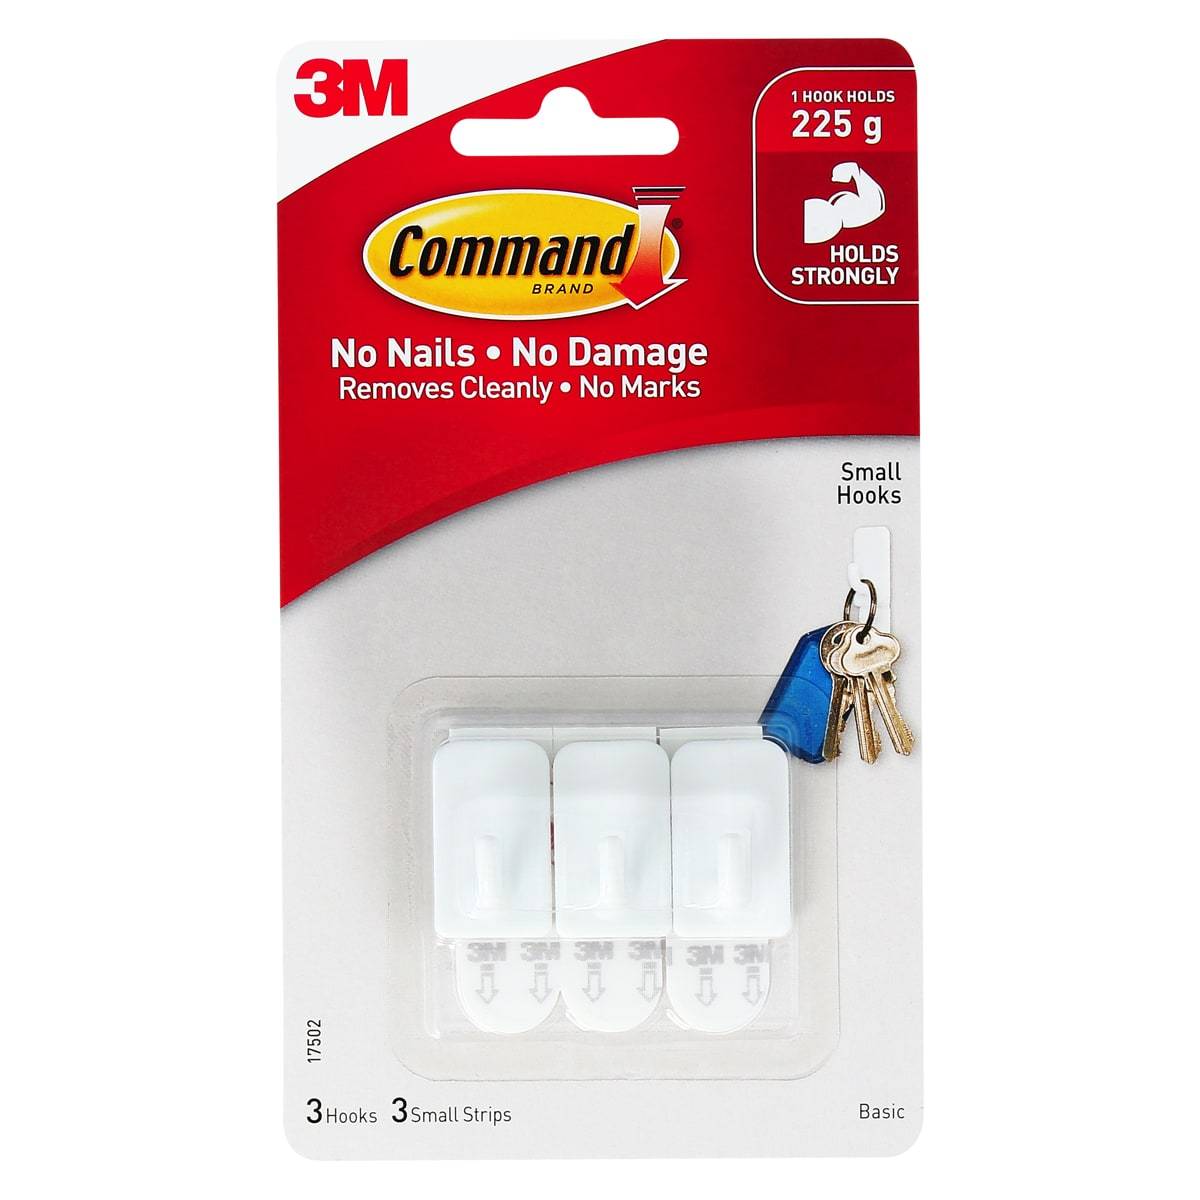 3M Command Small Hooks 1 Hook Holds 225 gm